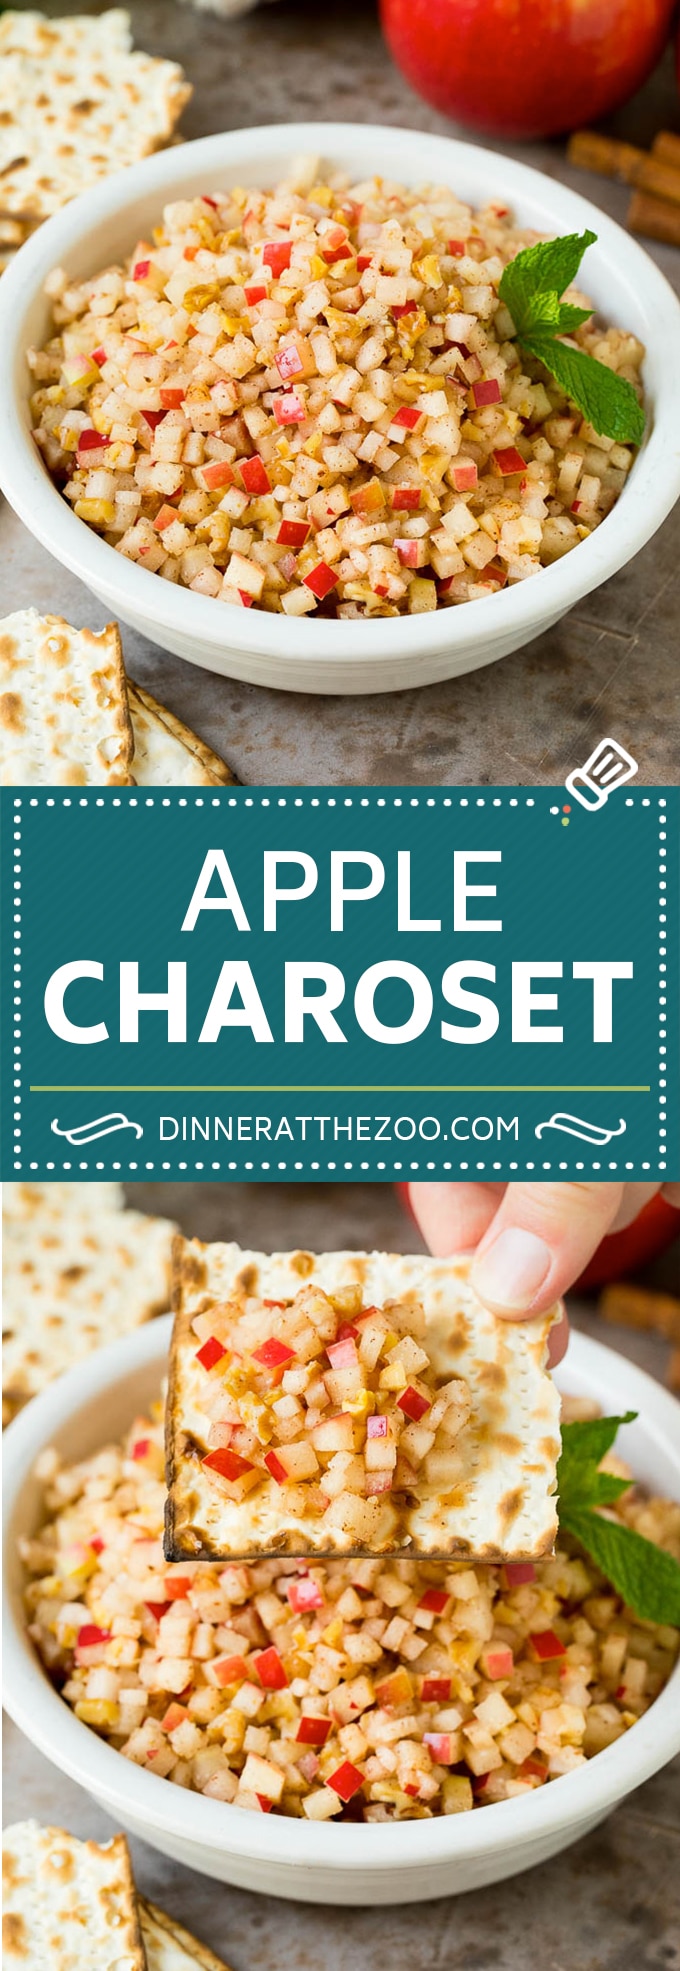 This charoset recipe is a blend of apples, walnuts and honey, all mixed together to make a sweet spread for Passover.